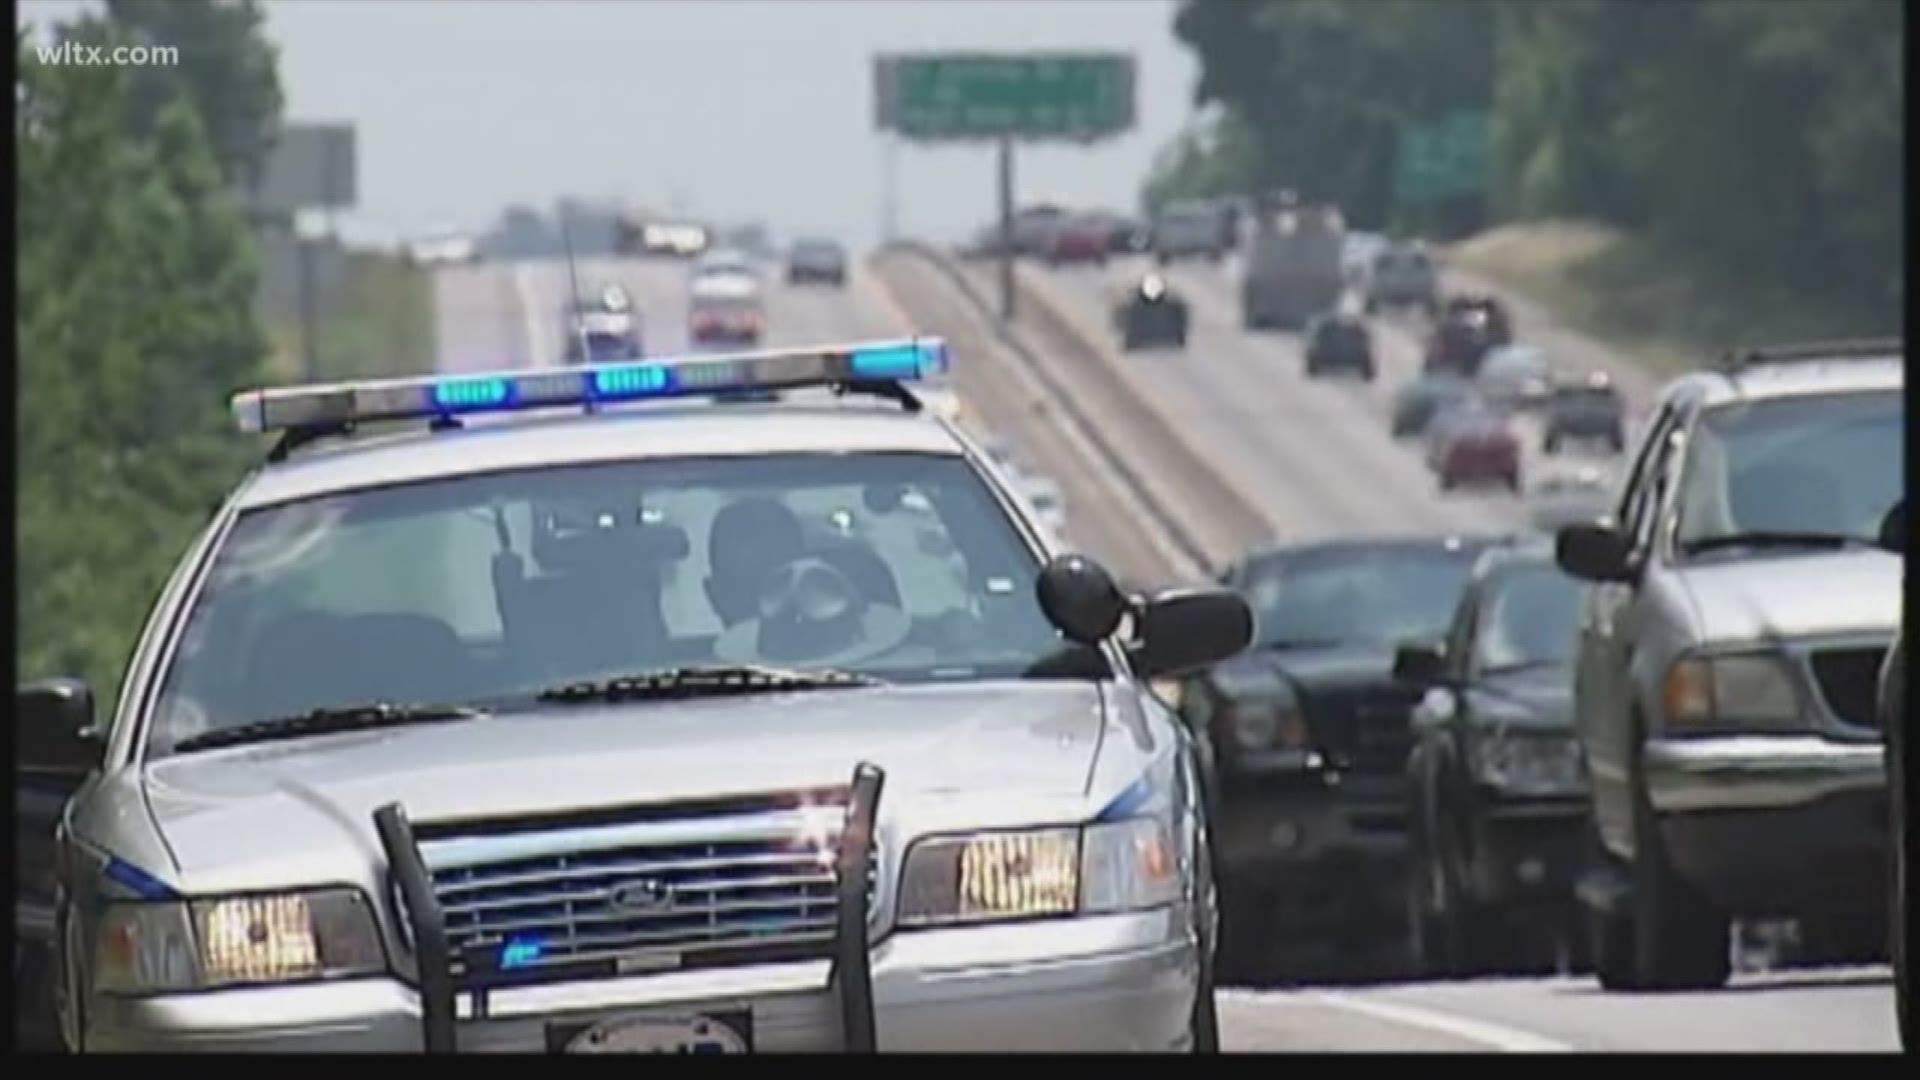 Law enforcement officers in five Southern states are planning a crackdown on speeding motorists.